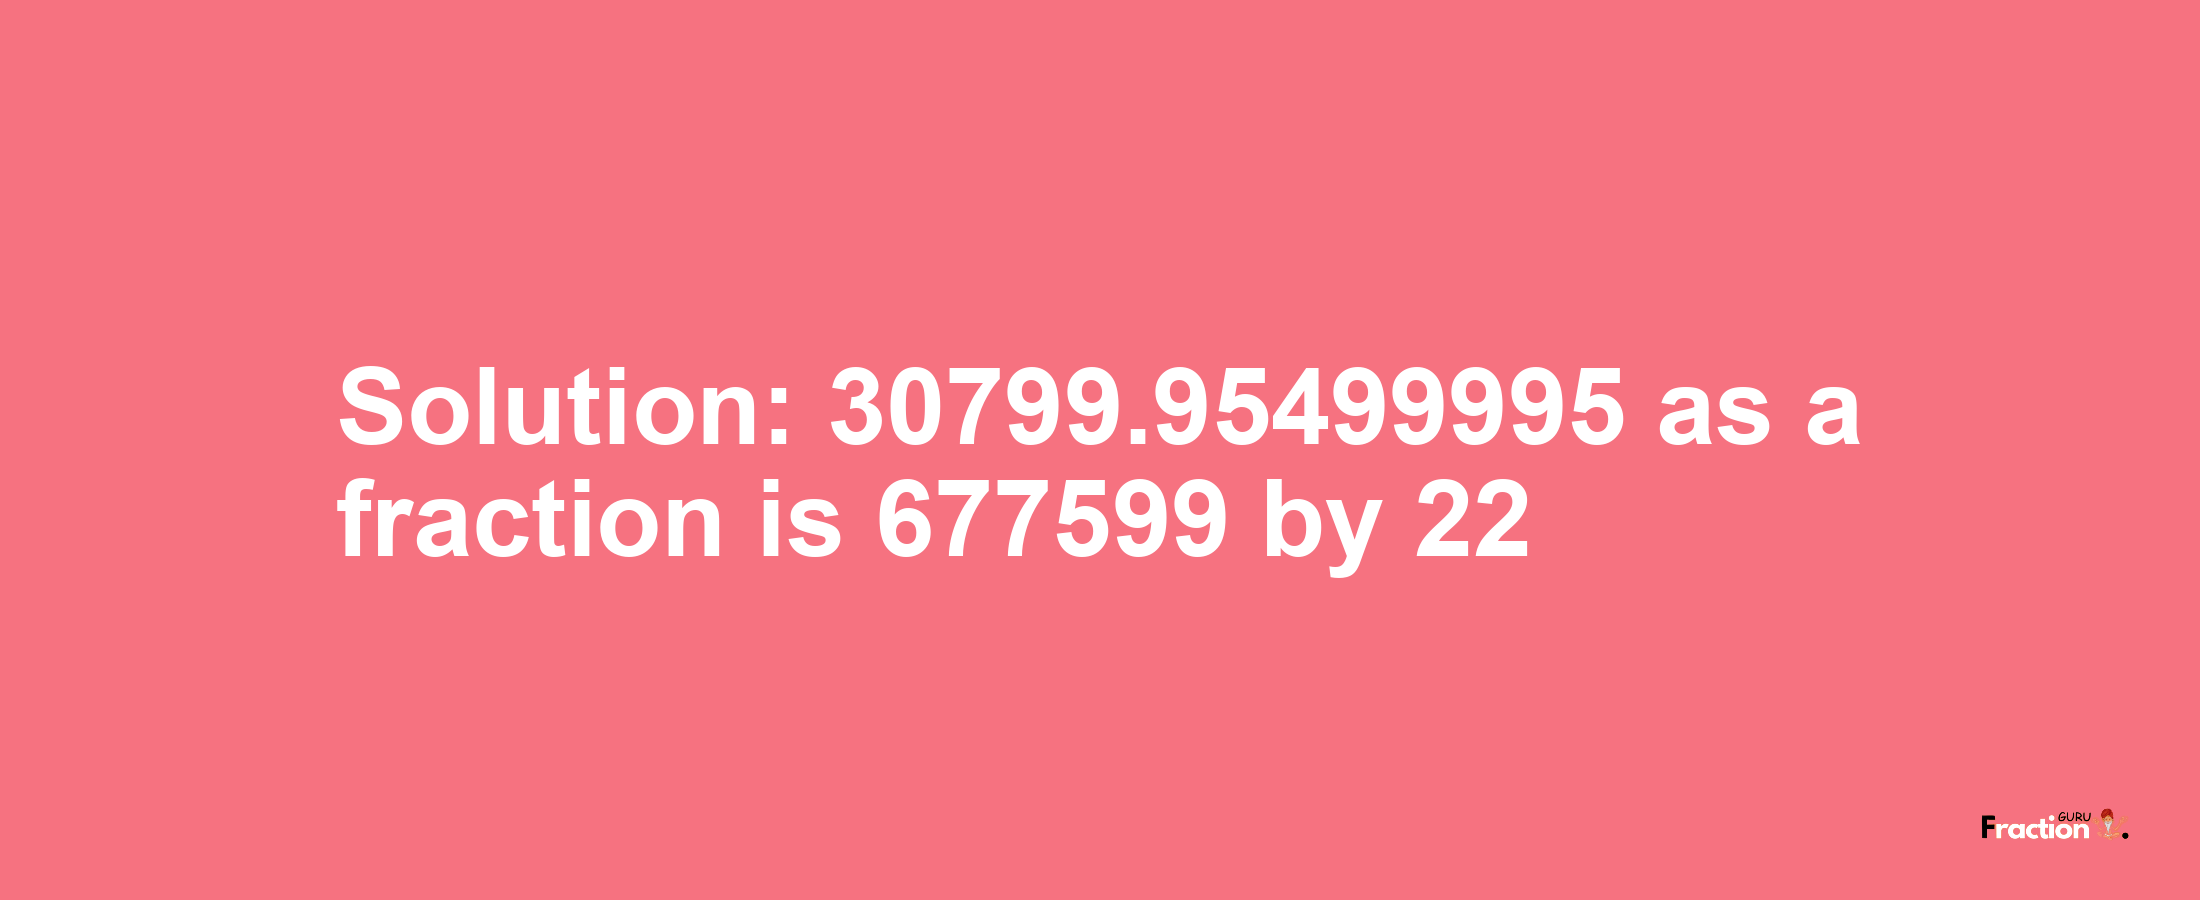 Solution:30799.95499995 as a fraction is 677599/22